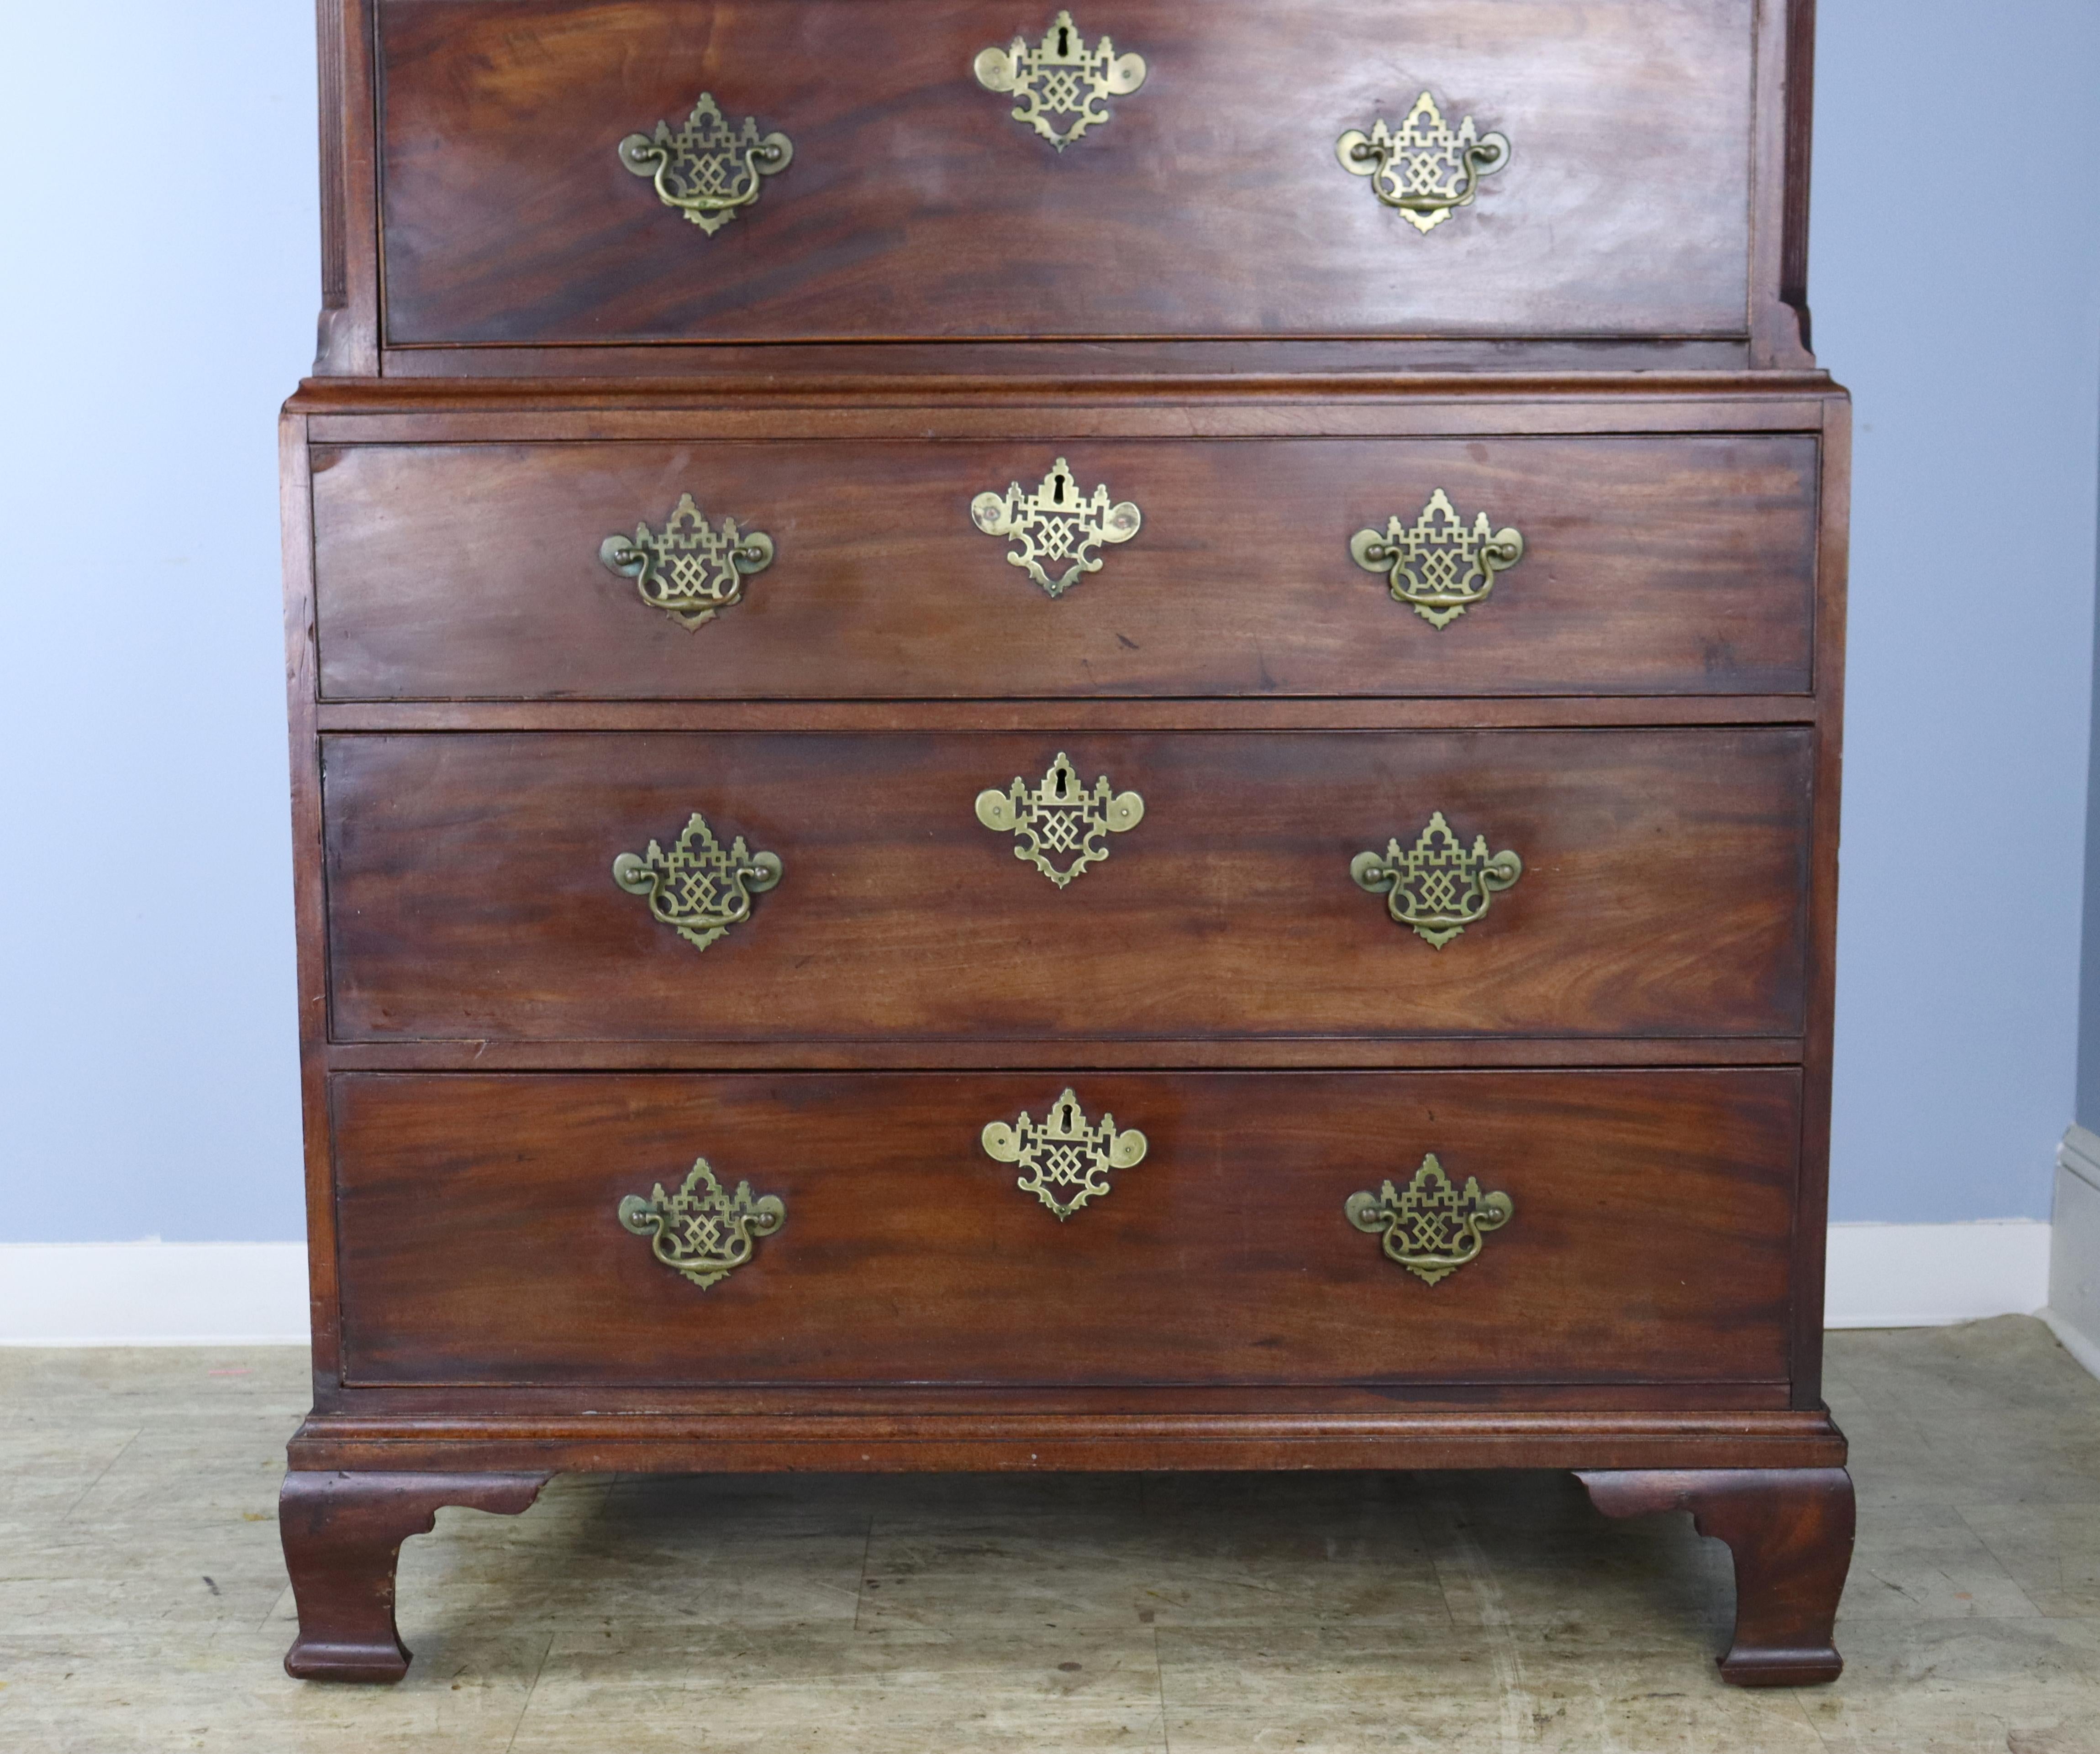 Early Georgian Mahogany Chest on Chest with Original Fretted Brass Hardware For Sale 8